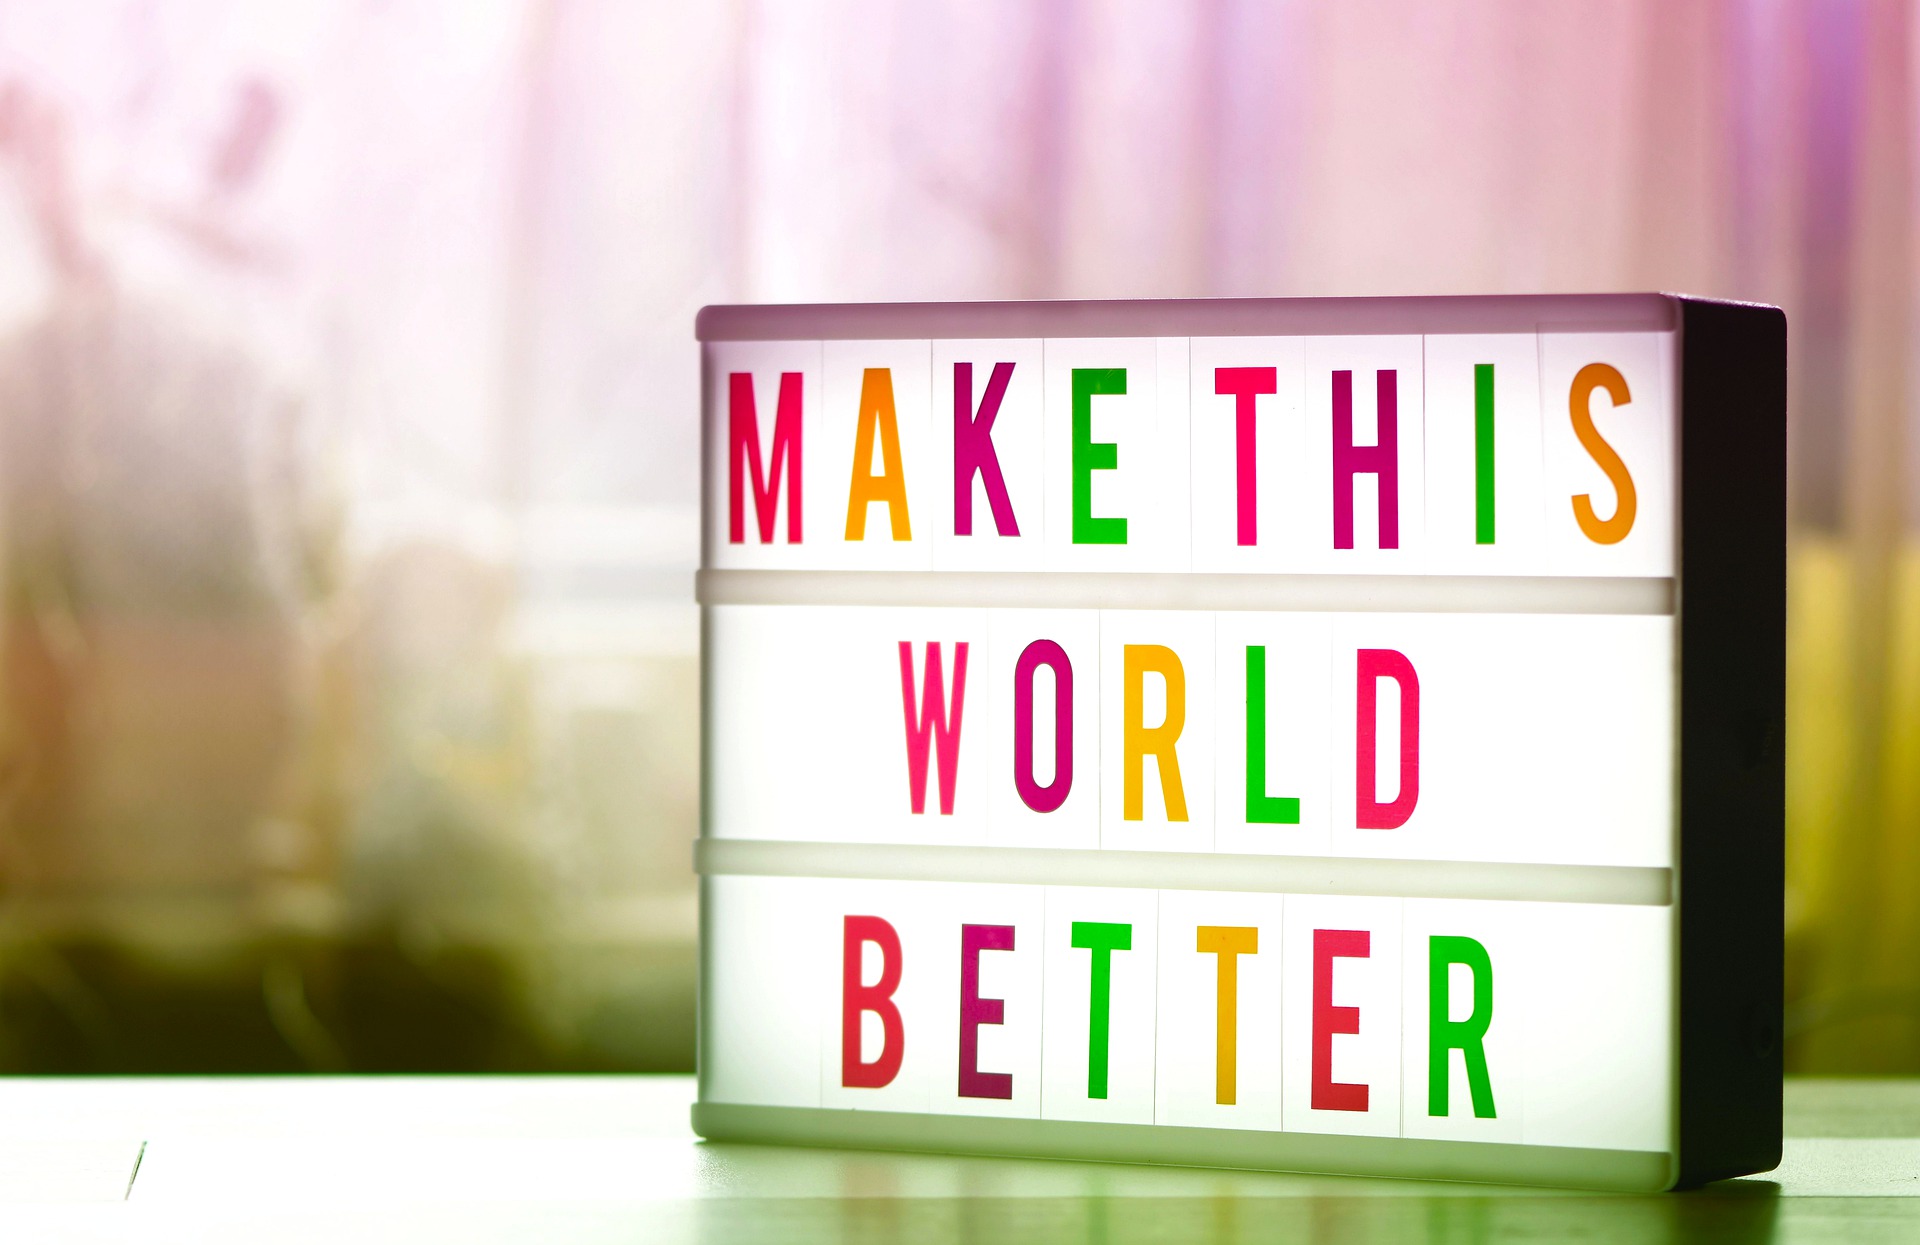 Volunteer your time to make this world better